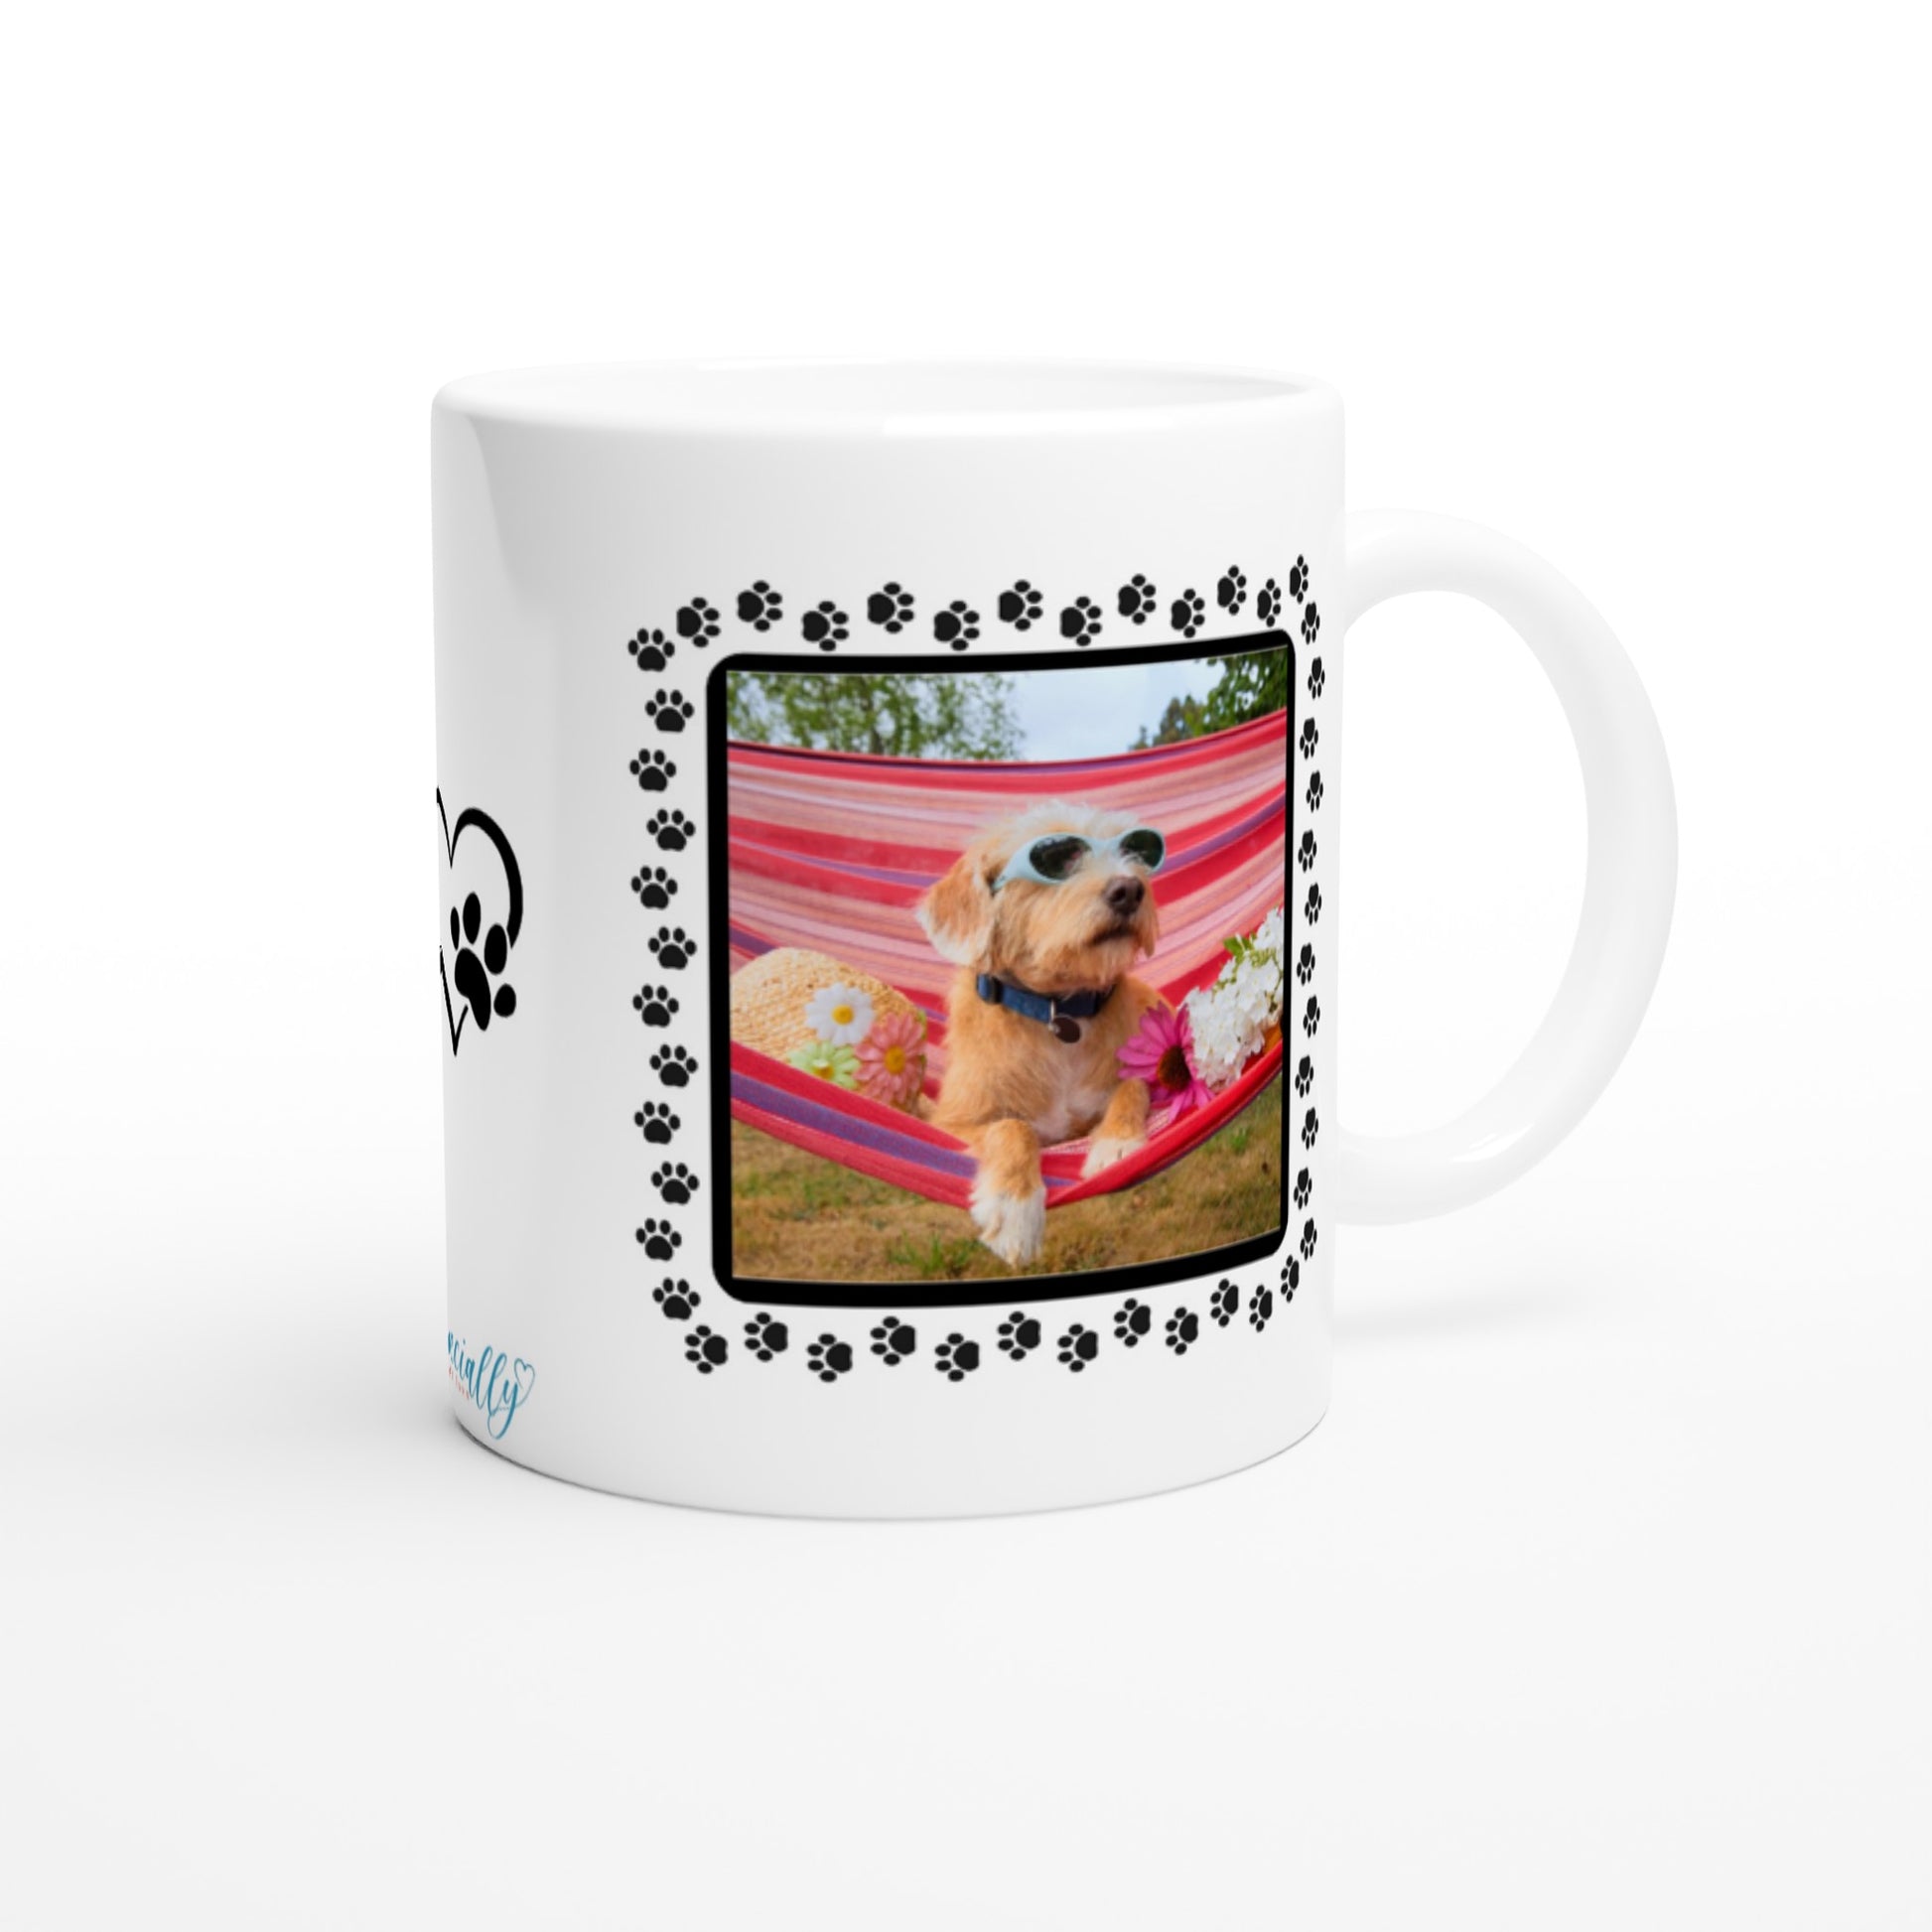 "Yes, I am a mother. My fur baby's name is..." Customizable Photo & Name Mug back image